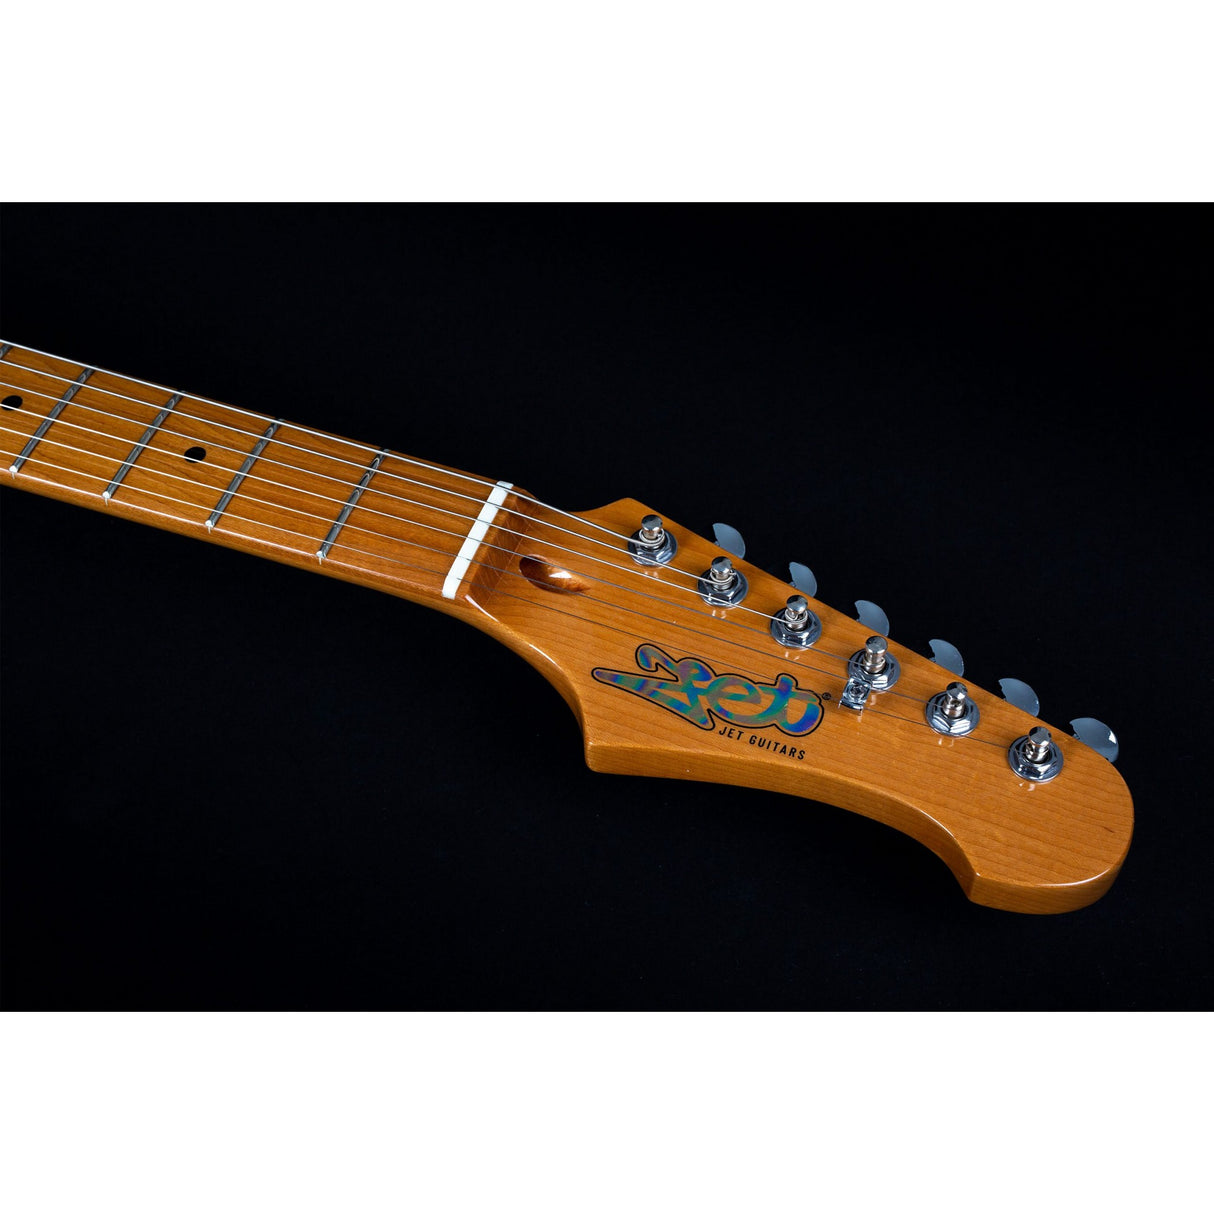 Jet Guitars JT 300 SB SS Basswood Body Electric Guitar with Roasted Maple Neck and Fretboard